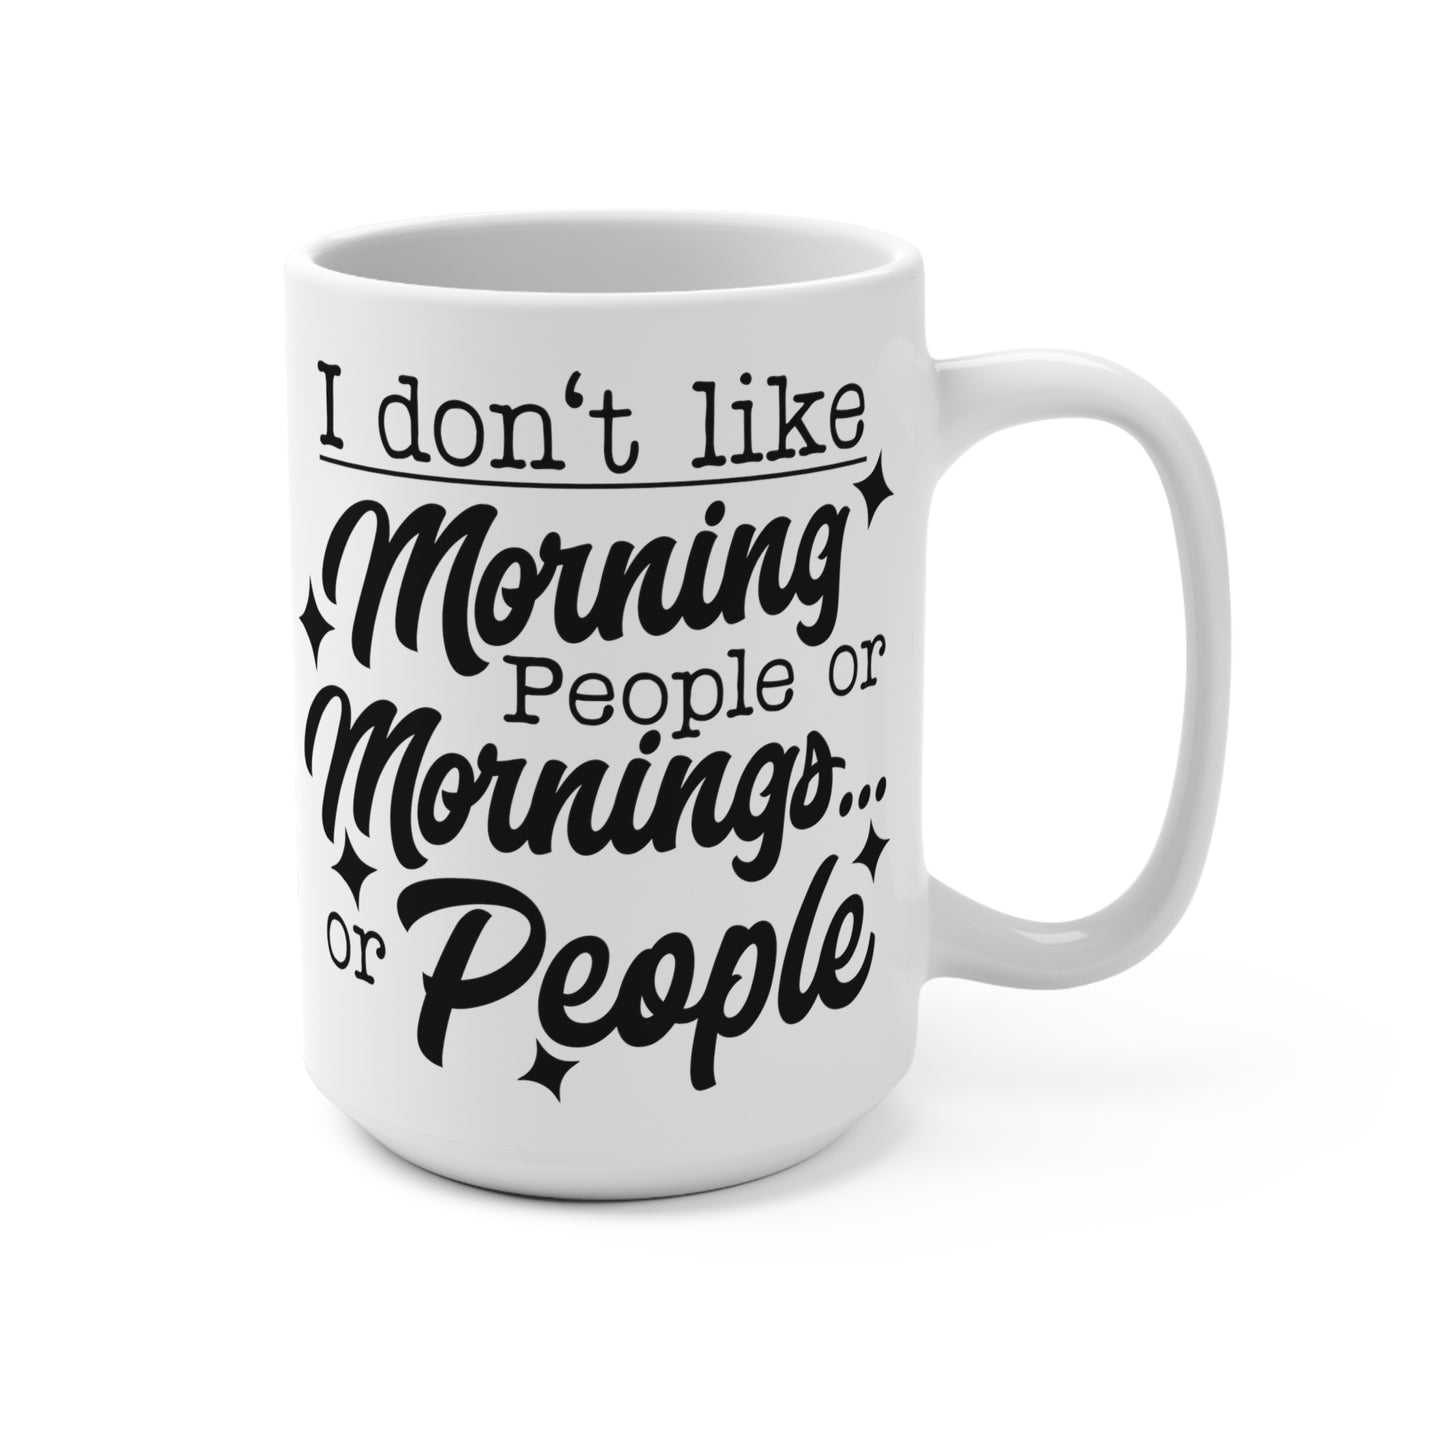 Funny Morning Quote Mug, Sarcastic Coffee Cup, Novelty Mug for Office, Gag Gift for Friend, Humorous Sayings, Typographic Mug for Coworkers